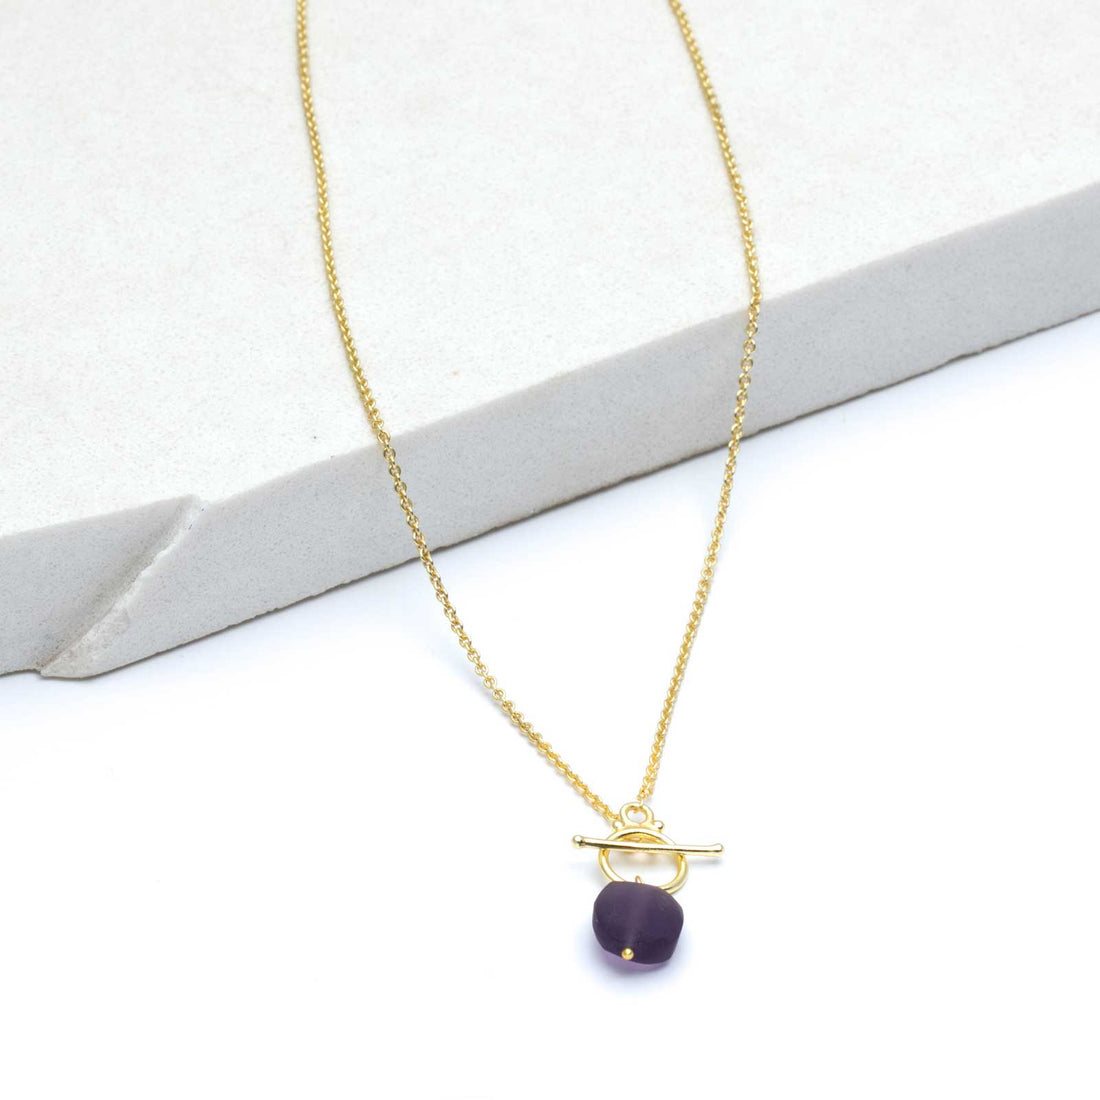 Amethyst Chalcedony Pendant Drop Necklace, 18” - Gold Plated Necklace - rockflowerpaper